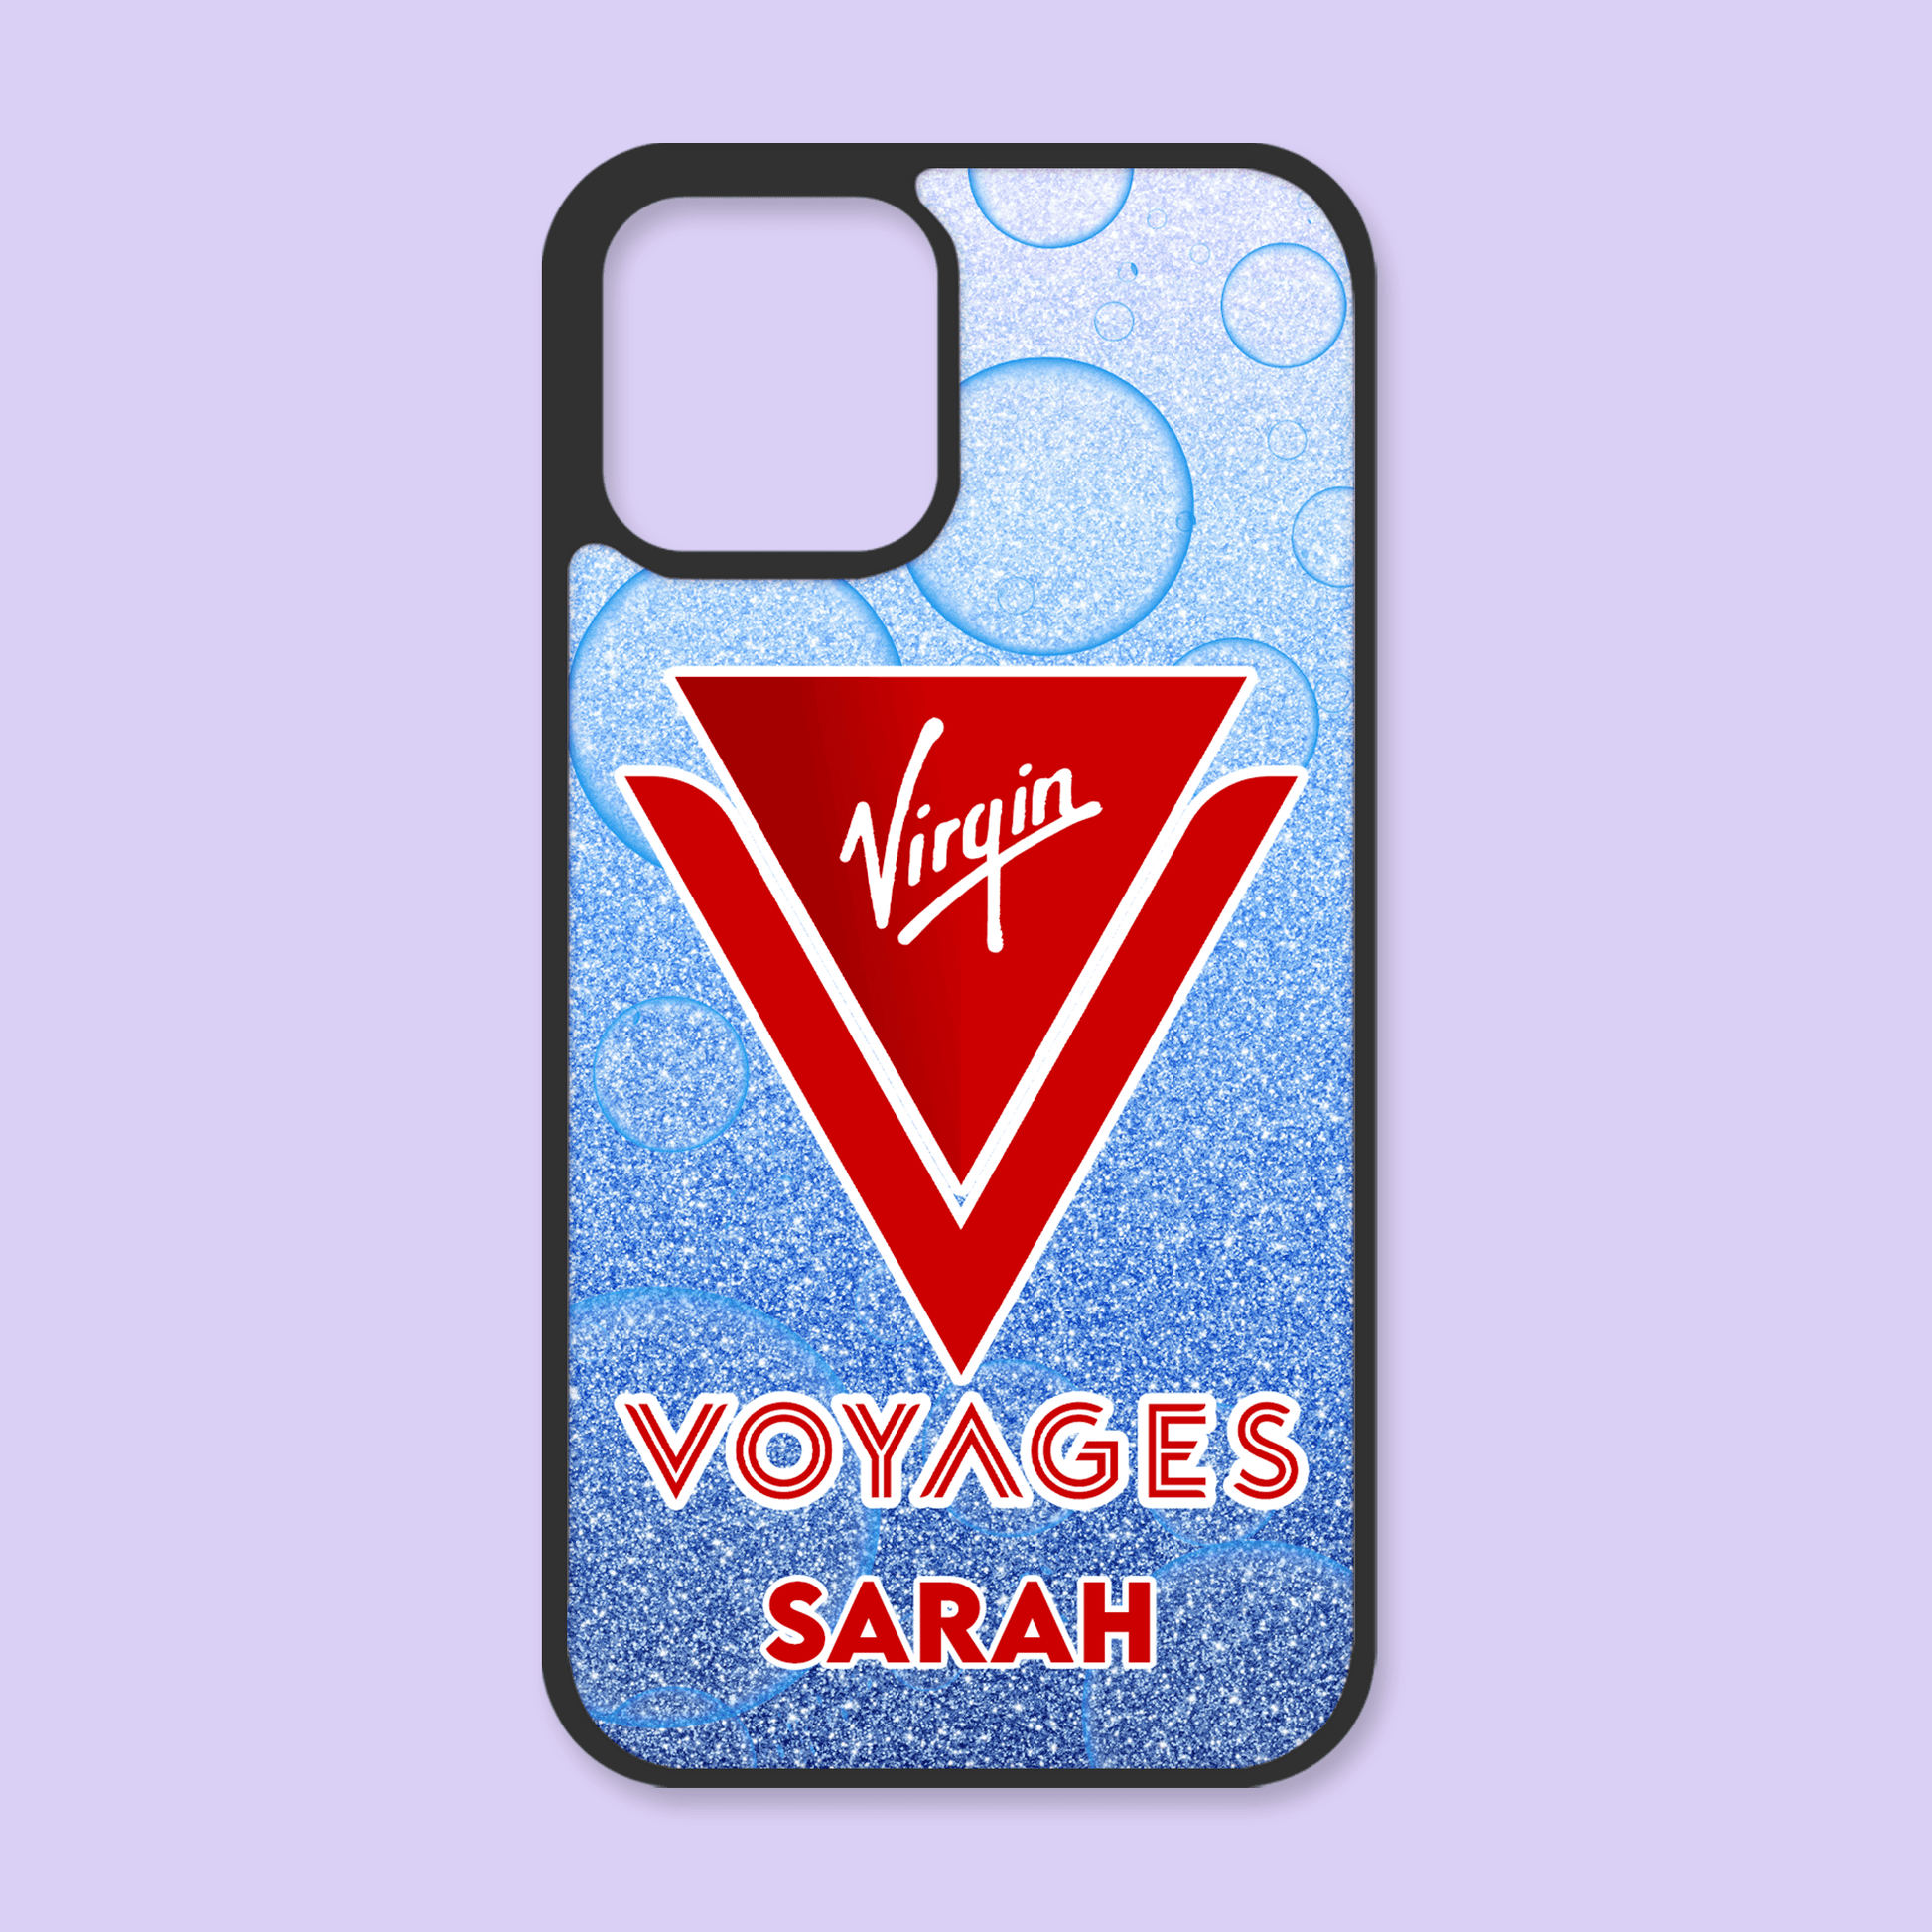 Virgin Voyages Personalized Phone Case - Two Crafty Gays